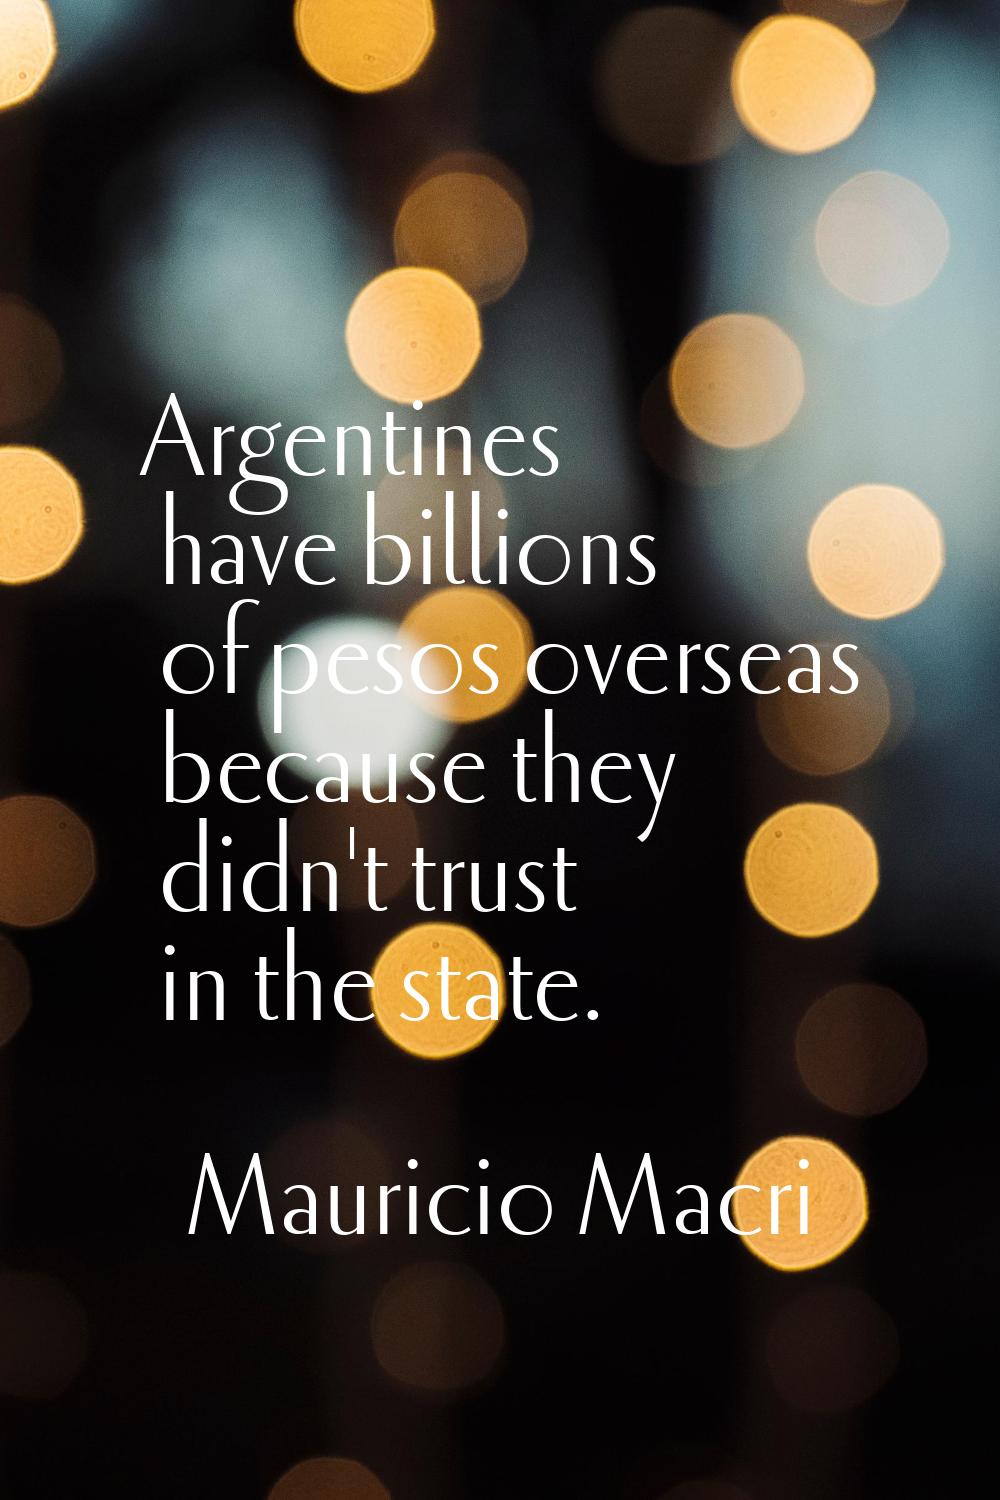 Argentines have billions of pesos overseas because they didn't trust in the state.